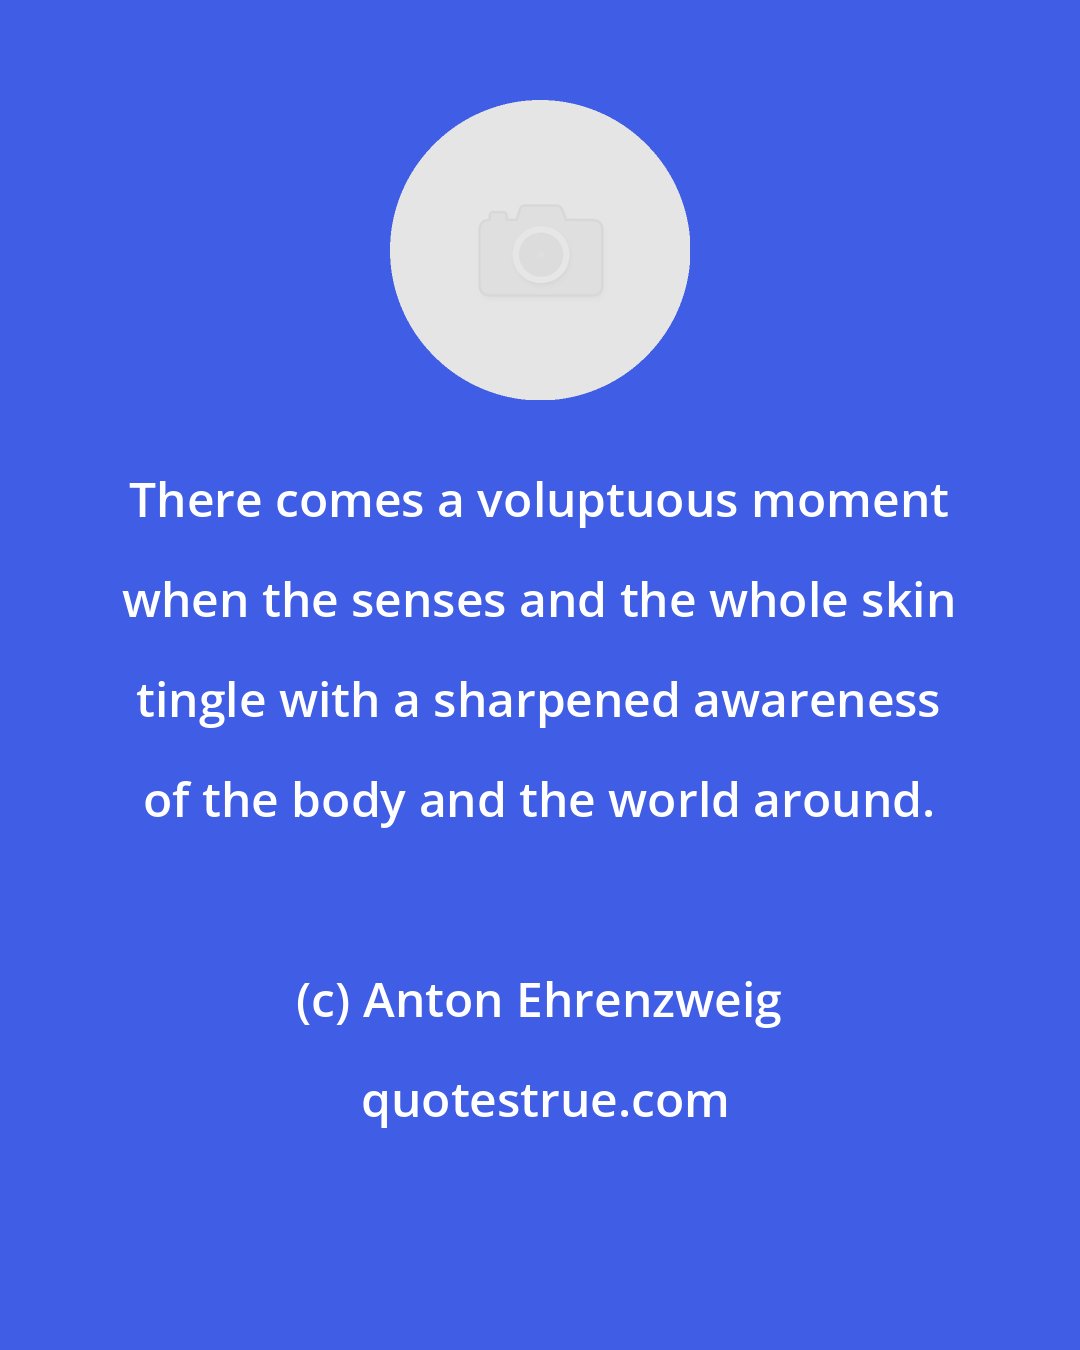 Anton Ehrenzweig: There comes a voluptuous moment when the senses and the whole skin tingle with a sharpened awareness of the body and the world around.